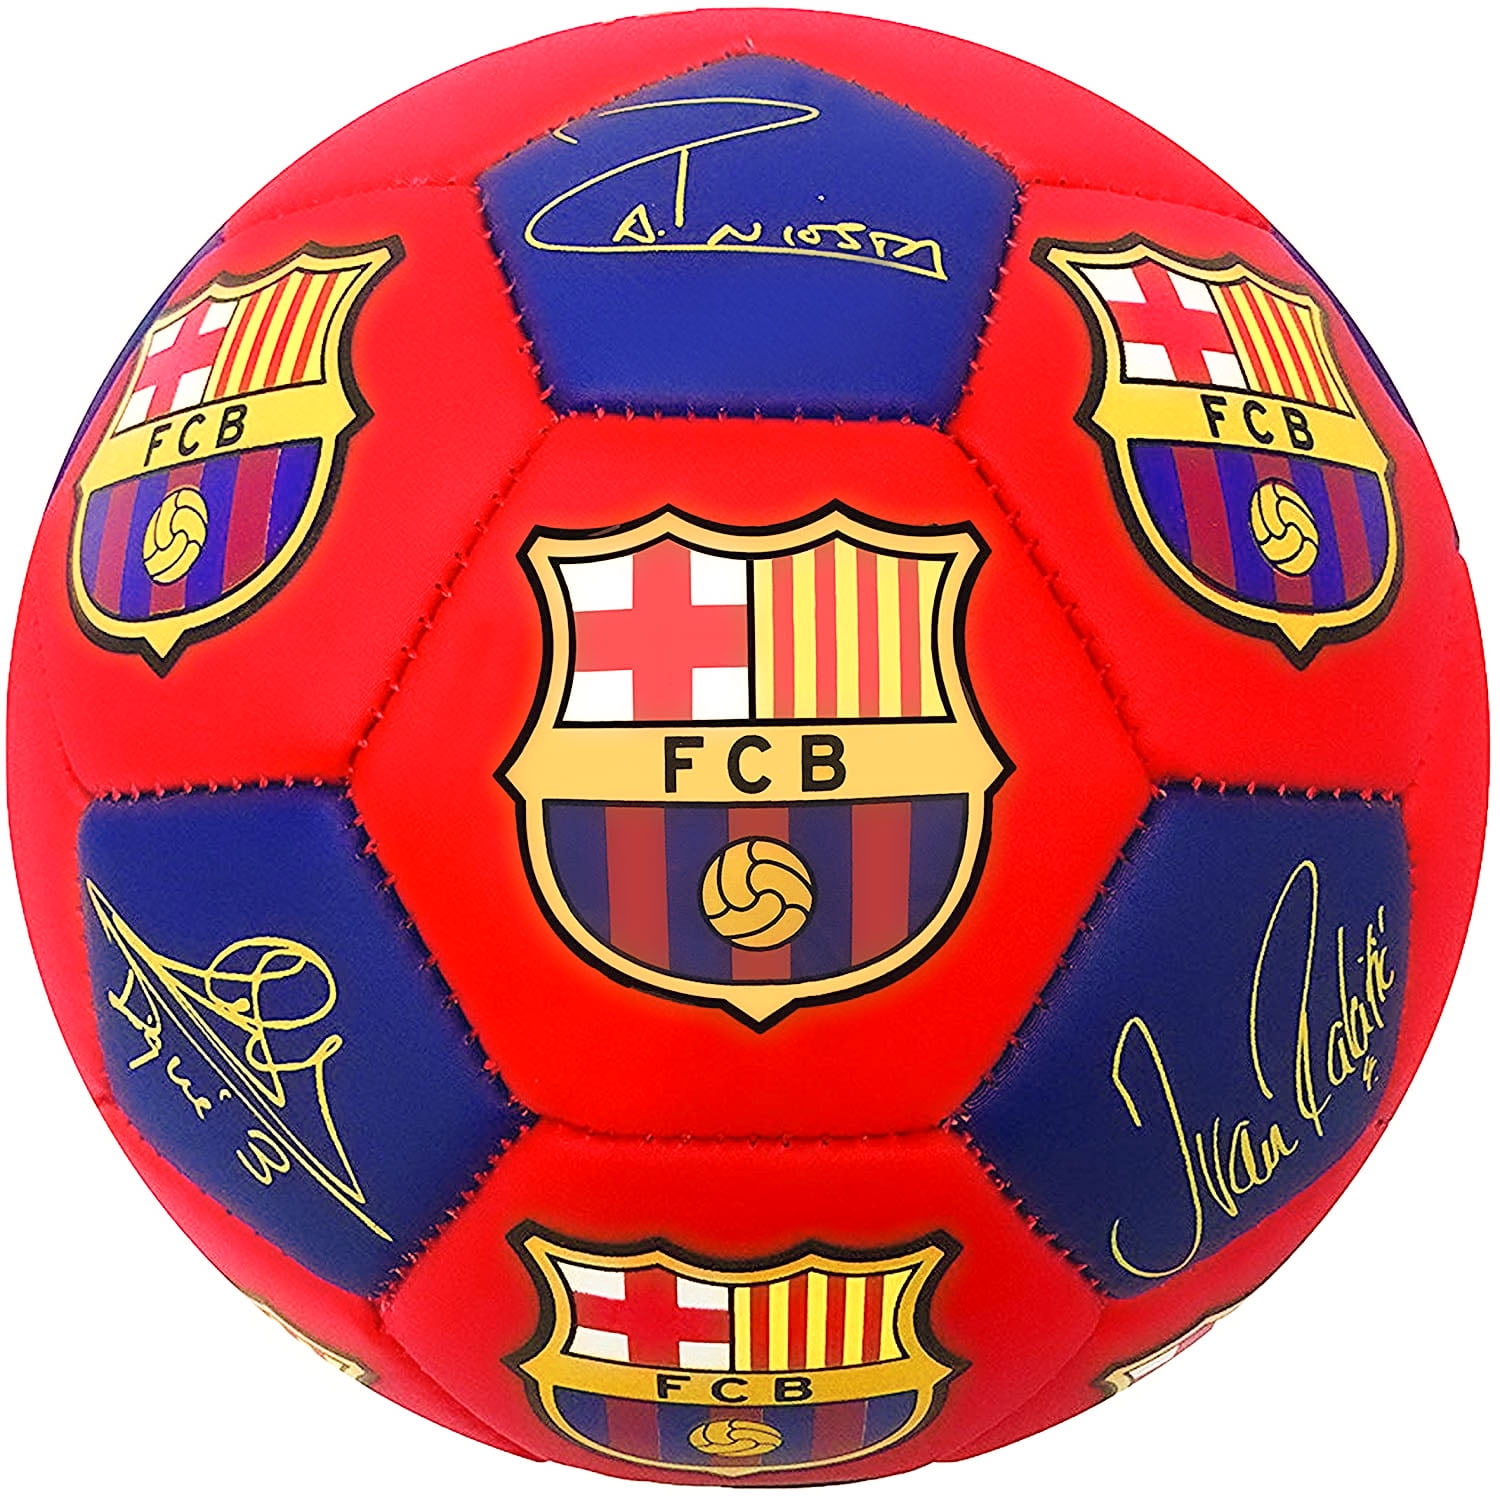 FC Barcelona Size 5 Soccer Ball Messi Official Licensed Signature Barca Futbol Great for Kids Soccer Players Coaches Gift Trainers 